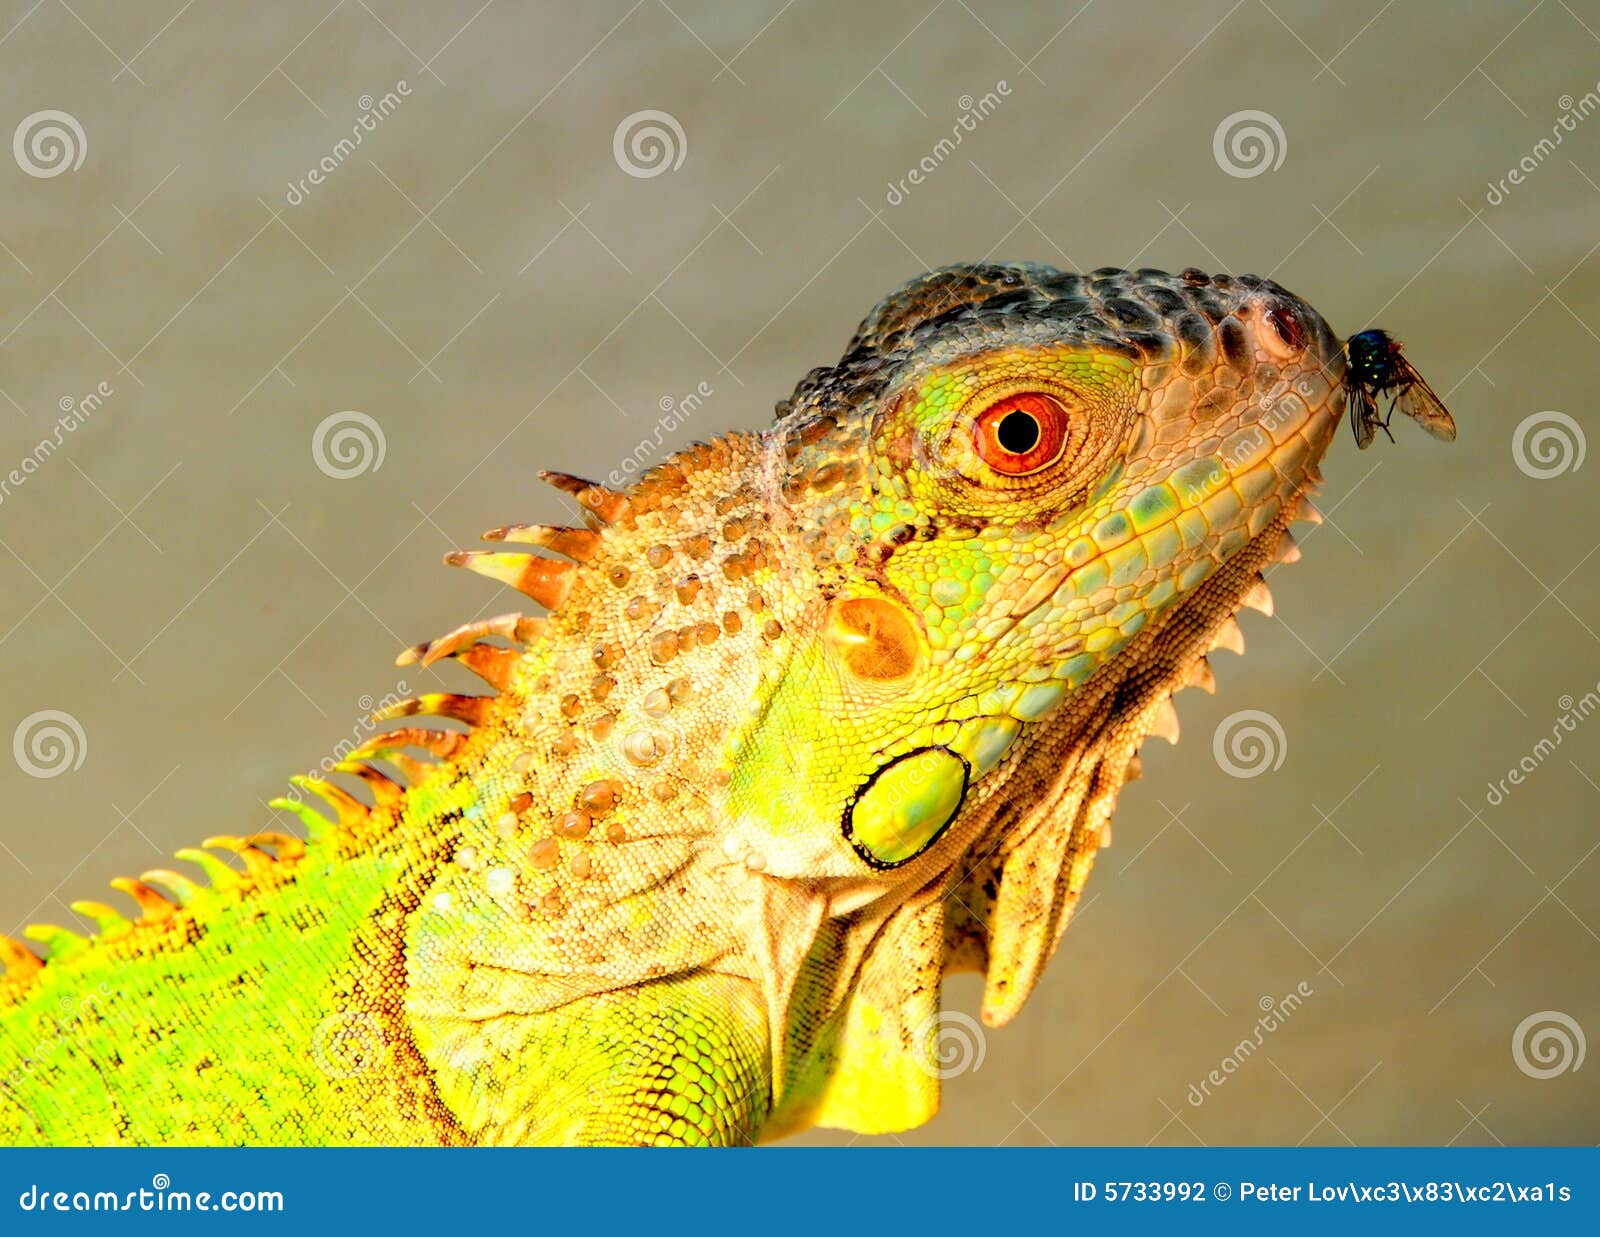 Leguan and fly stock photo. Image of spiky, greenaries ...